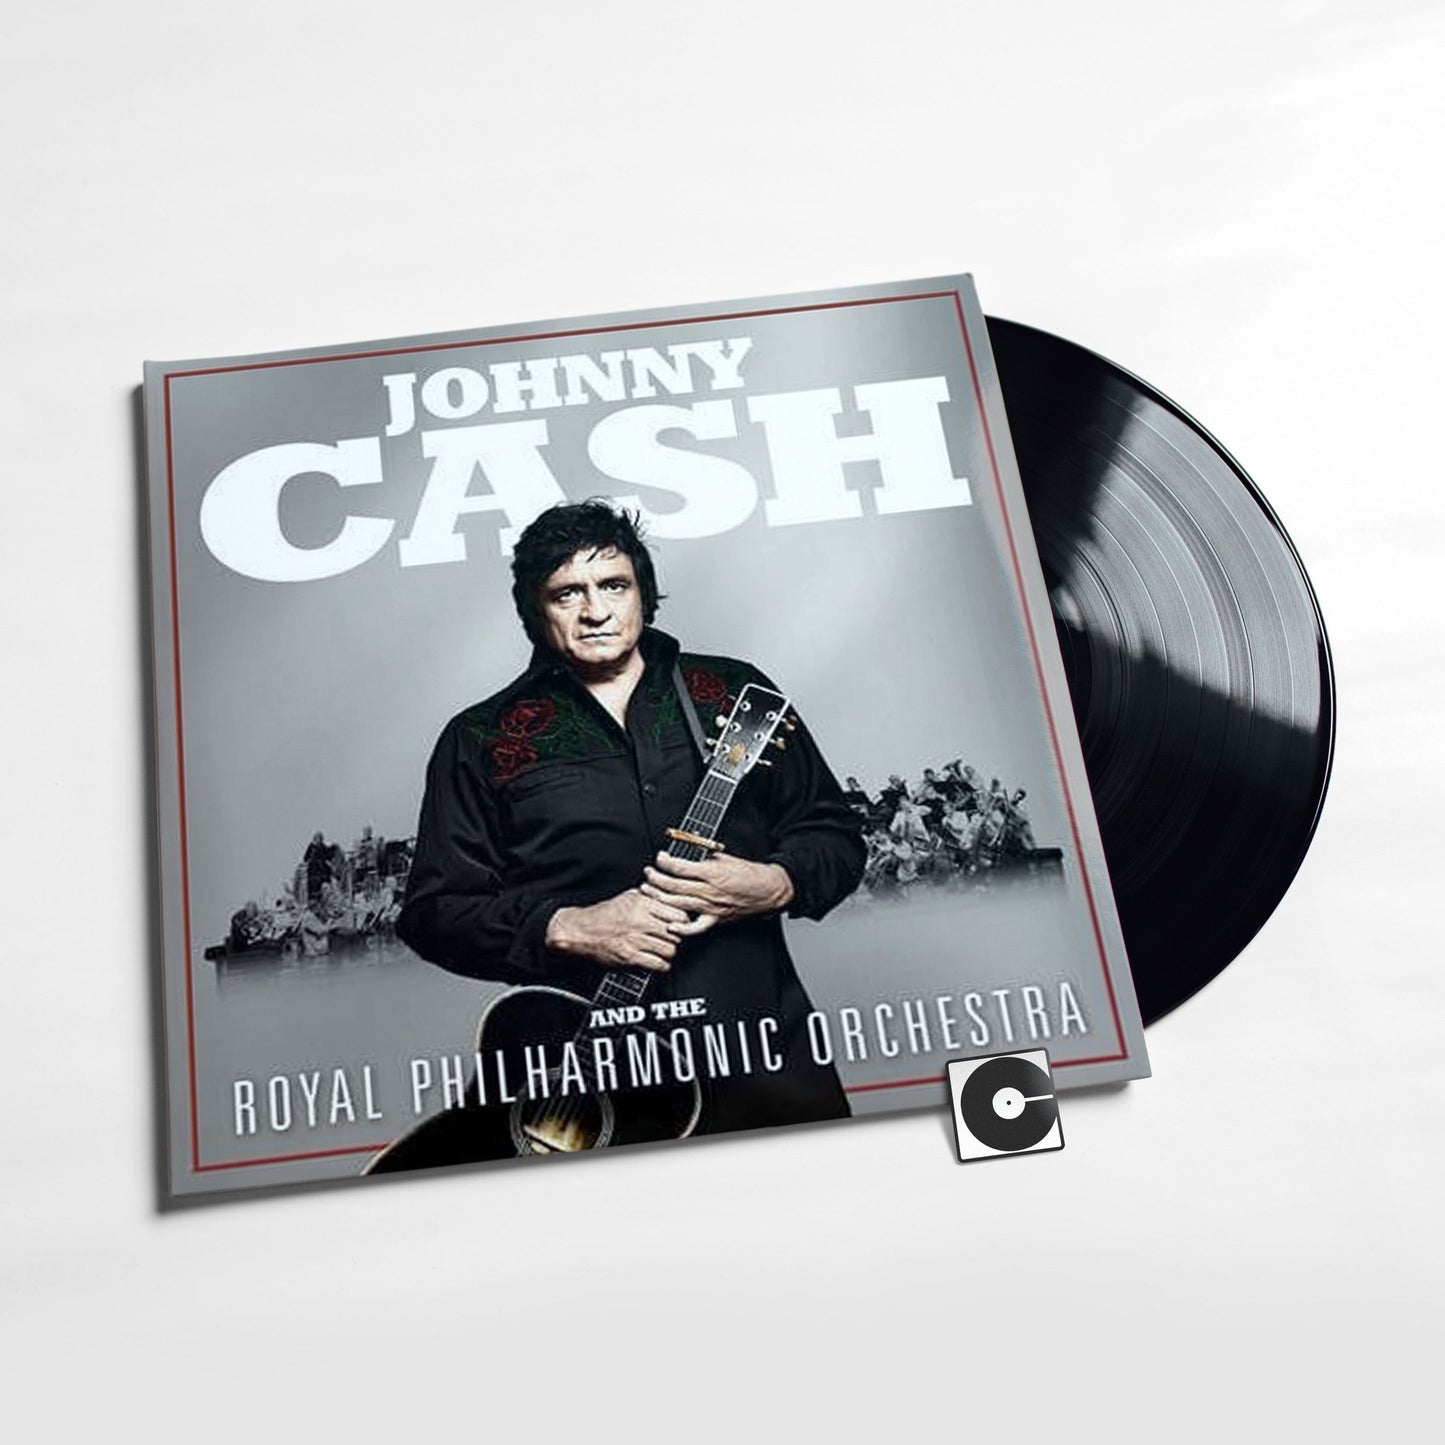 Johnny Cash - "Johnny Cash And The Royal Philharmonic Orchestra"